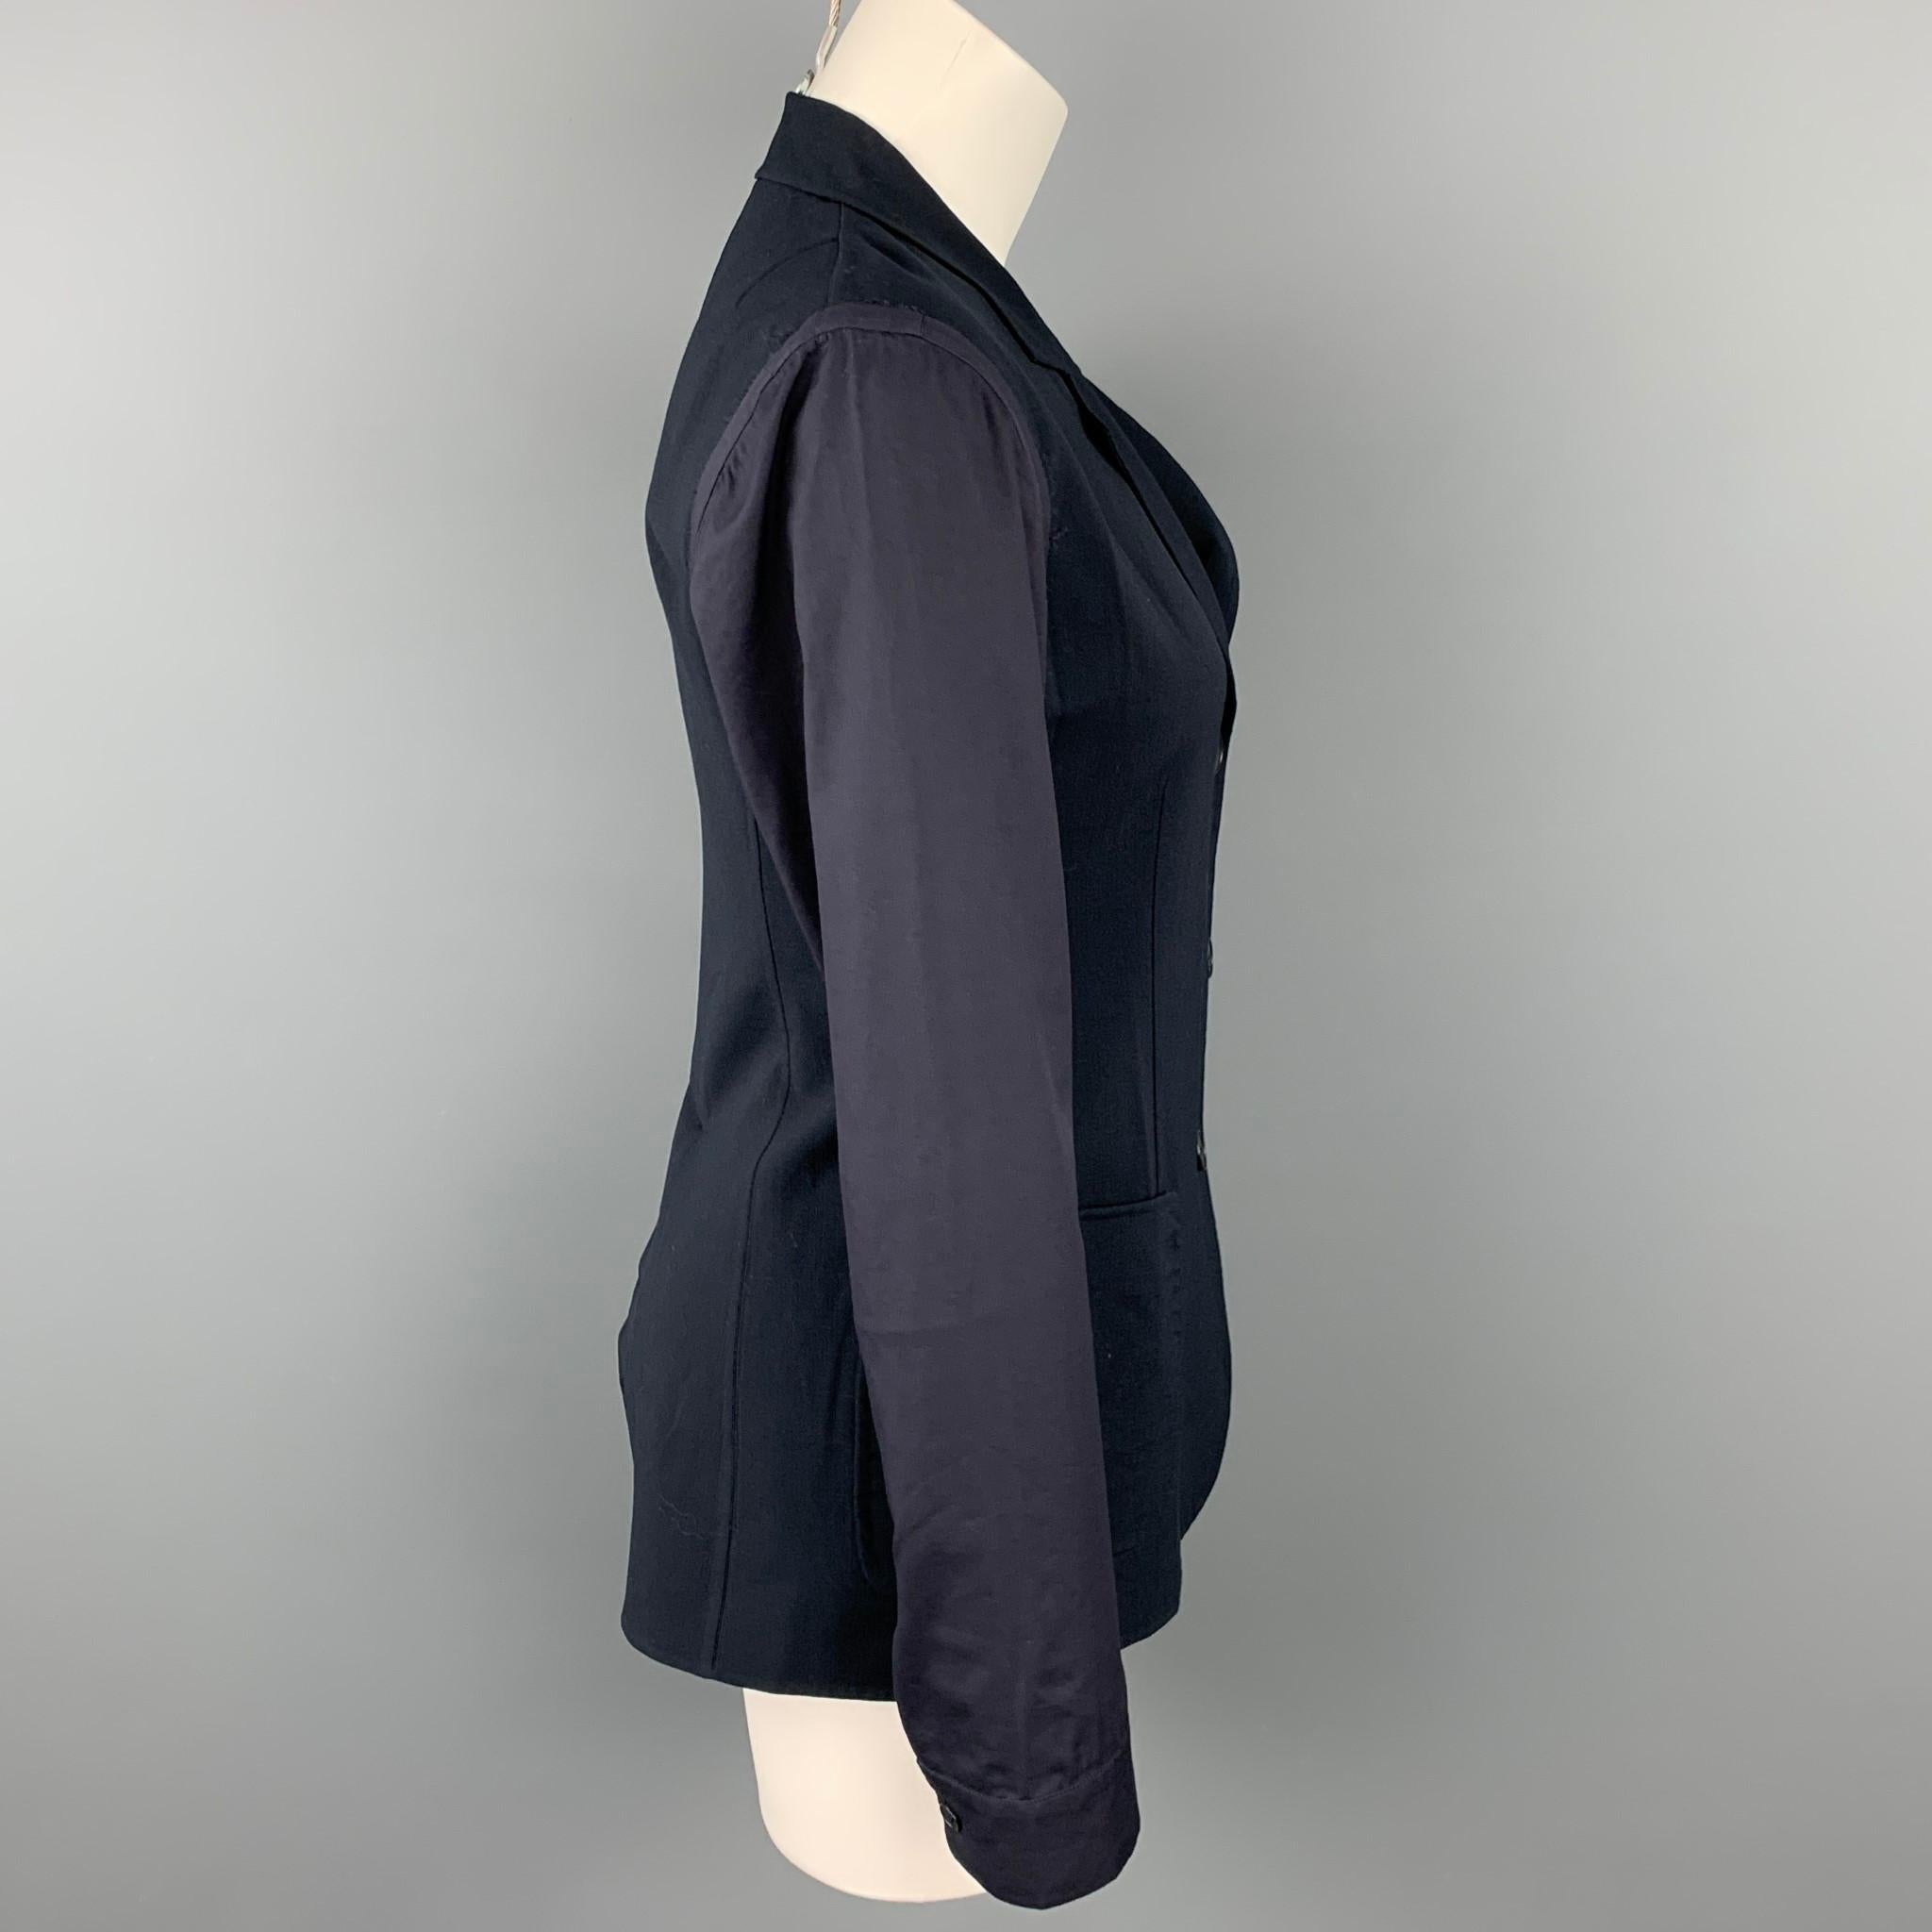 JIL SANDER blazer comes in a navy two toned virgin wool featuring a notch lapel, patch pockets, and a buttoned closure. Made in Italy.

Very Good Pre-Owned Condition.
Marked: 34

Measurements:

Shoulder: 15.5 in.
Bust: 32 in.
Sleeve: 25 in.
Length: